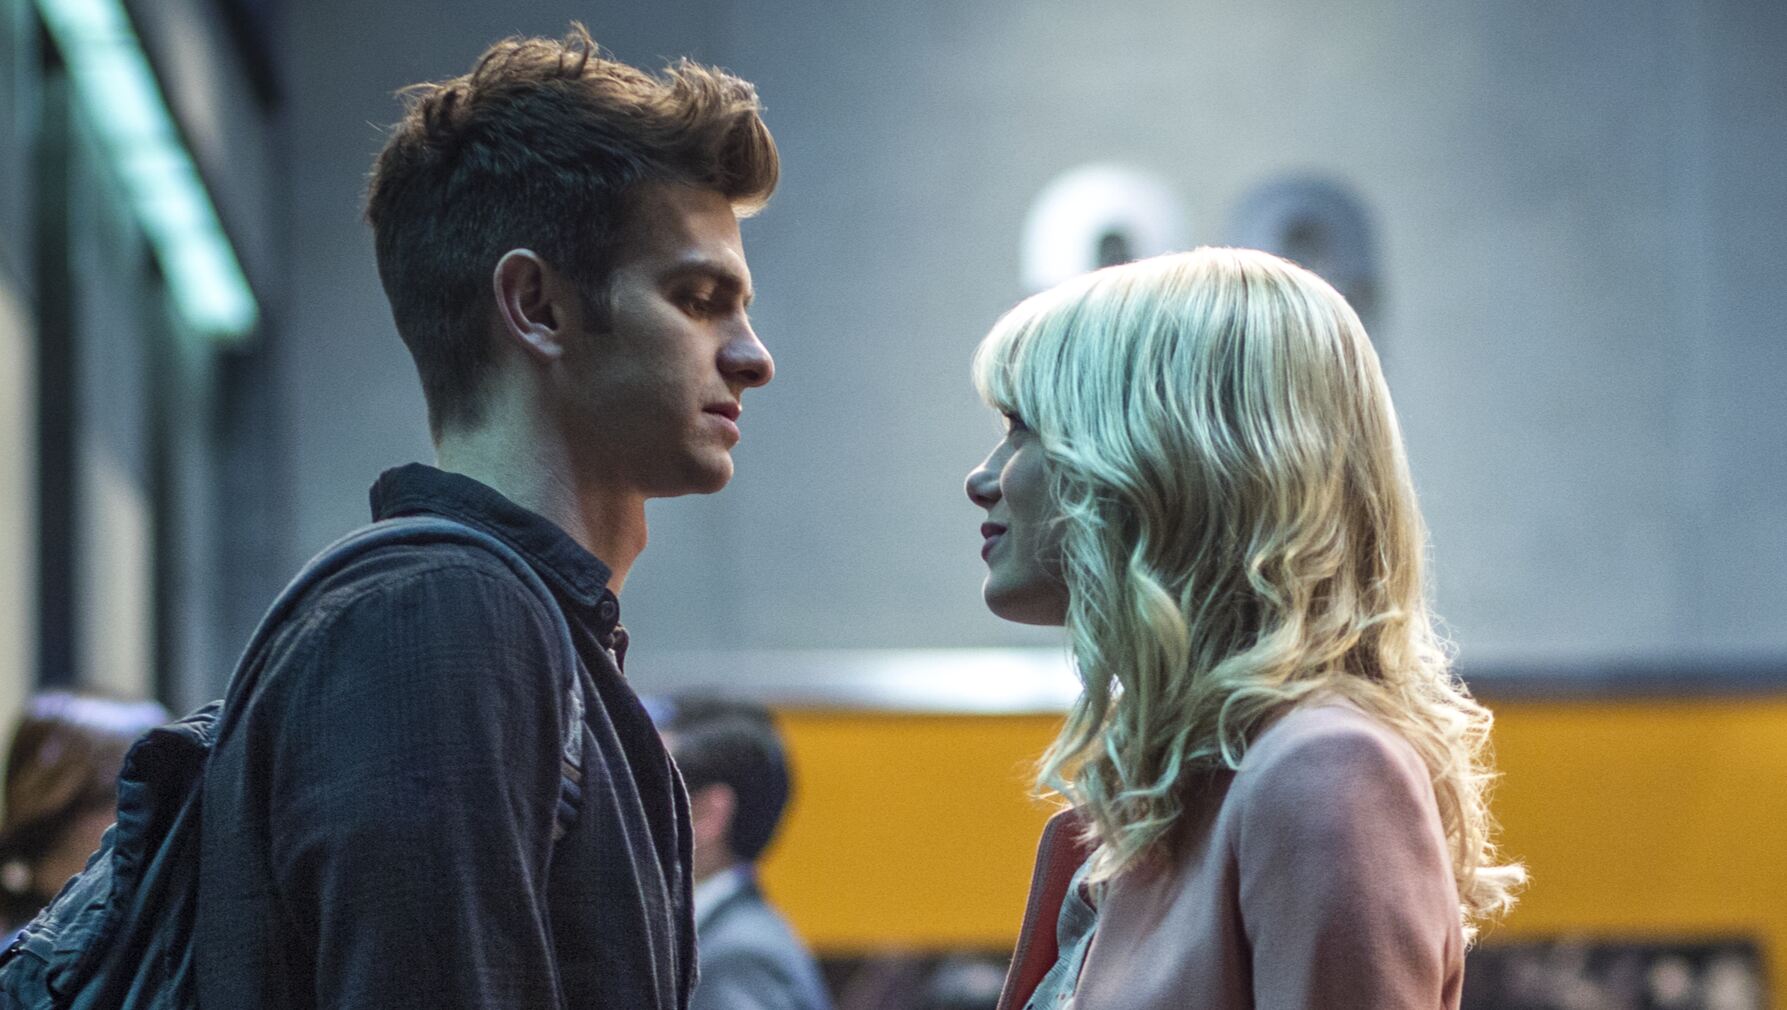 The Amazing Spider-Man' Cast Andrew Garfield After a 'Ridiculous' Deleted  Scene of Him Telling Emma Stone to Calm Down While Eating a Cheeseburger